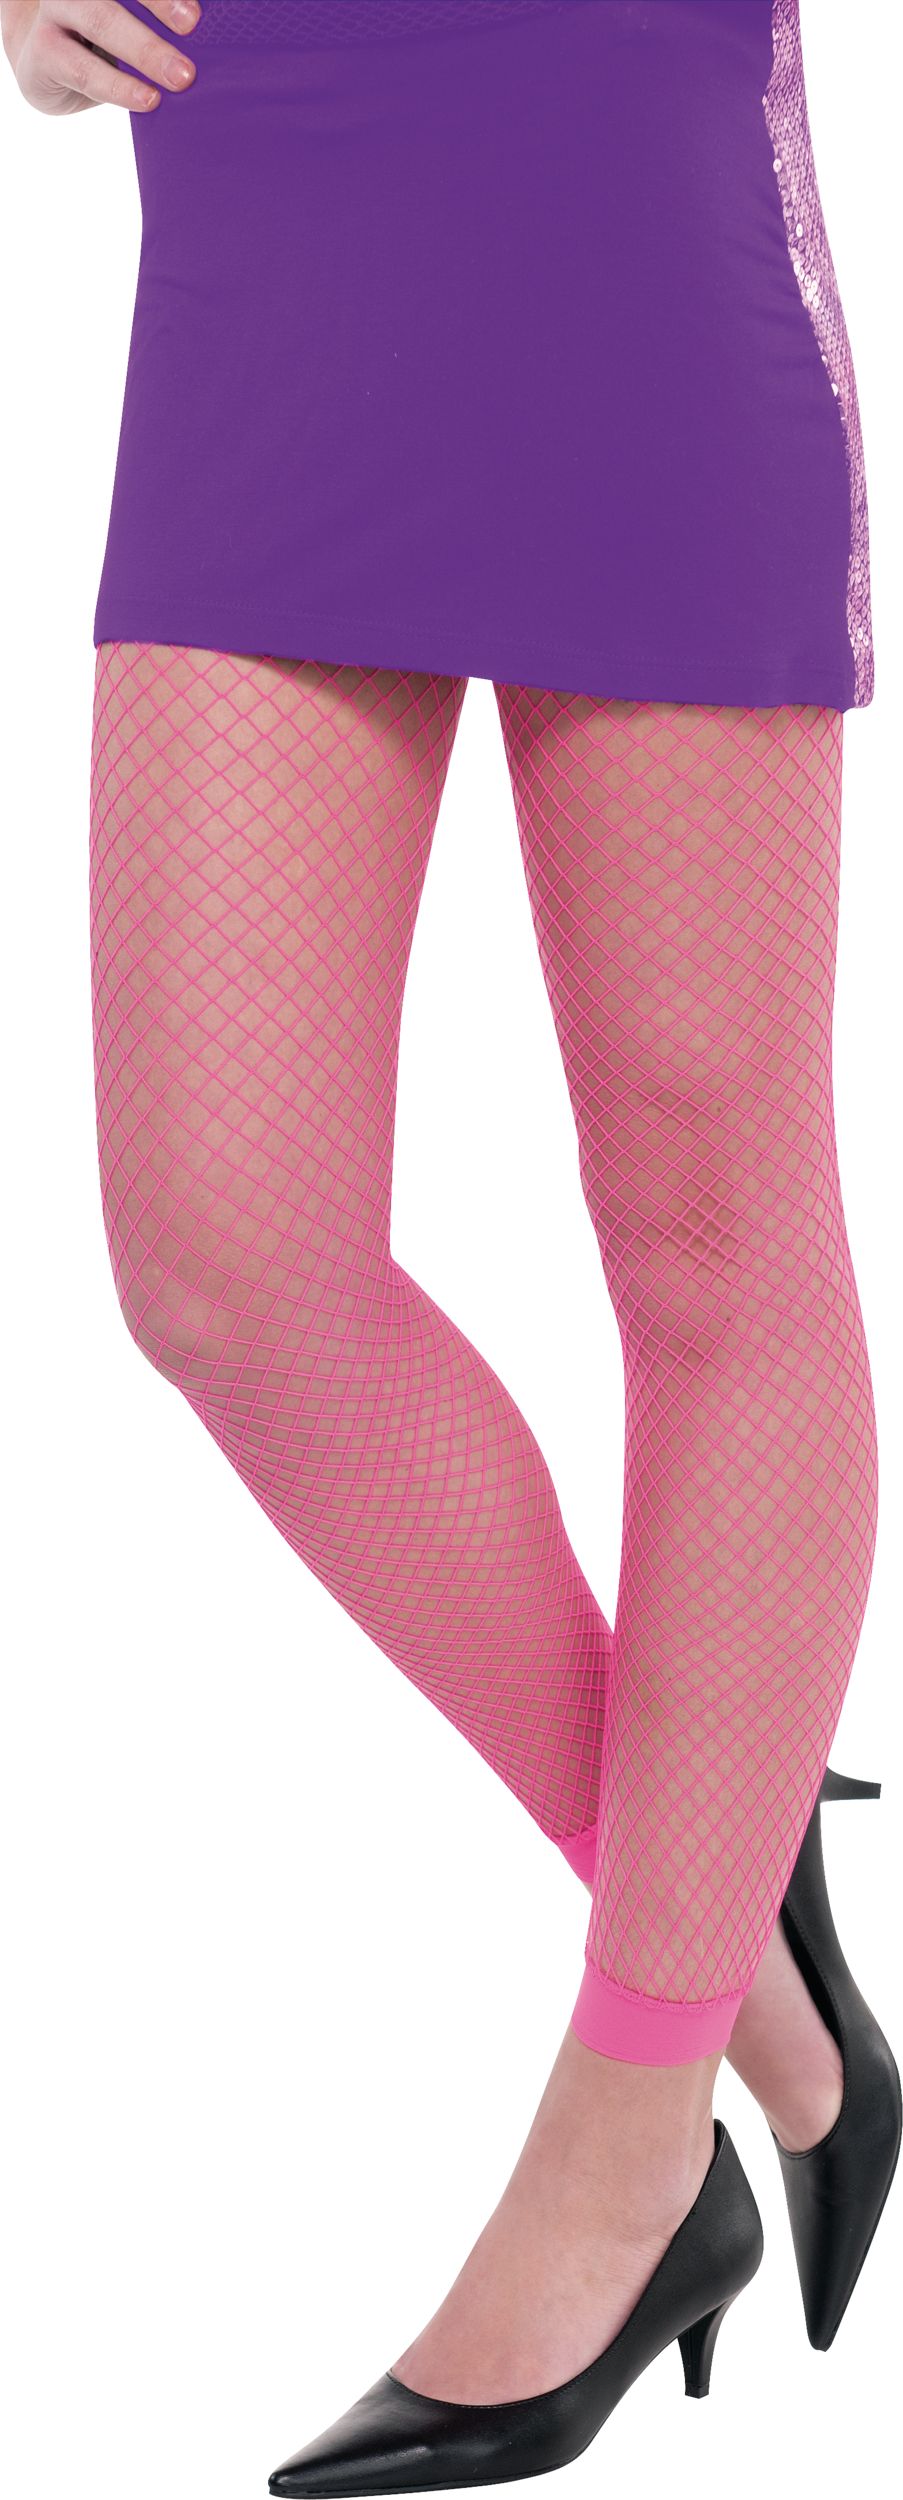 ADULTS PINK NEON FOOTLESS TIGHTS 80S PARTY RAVE WEAR IT PINK LADIES FANCY  DRESS